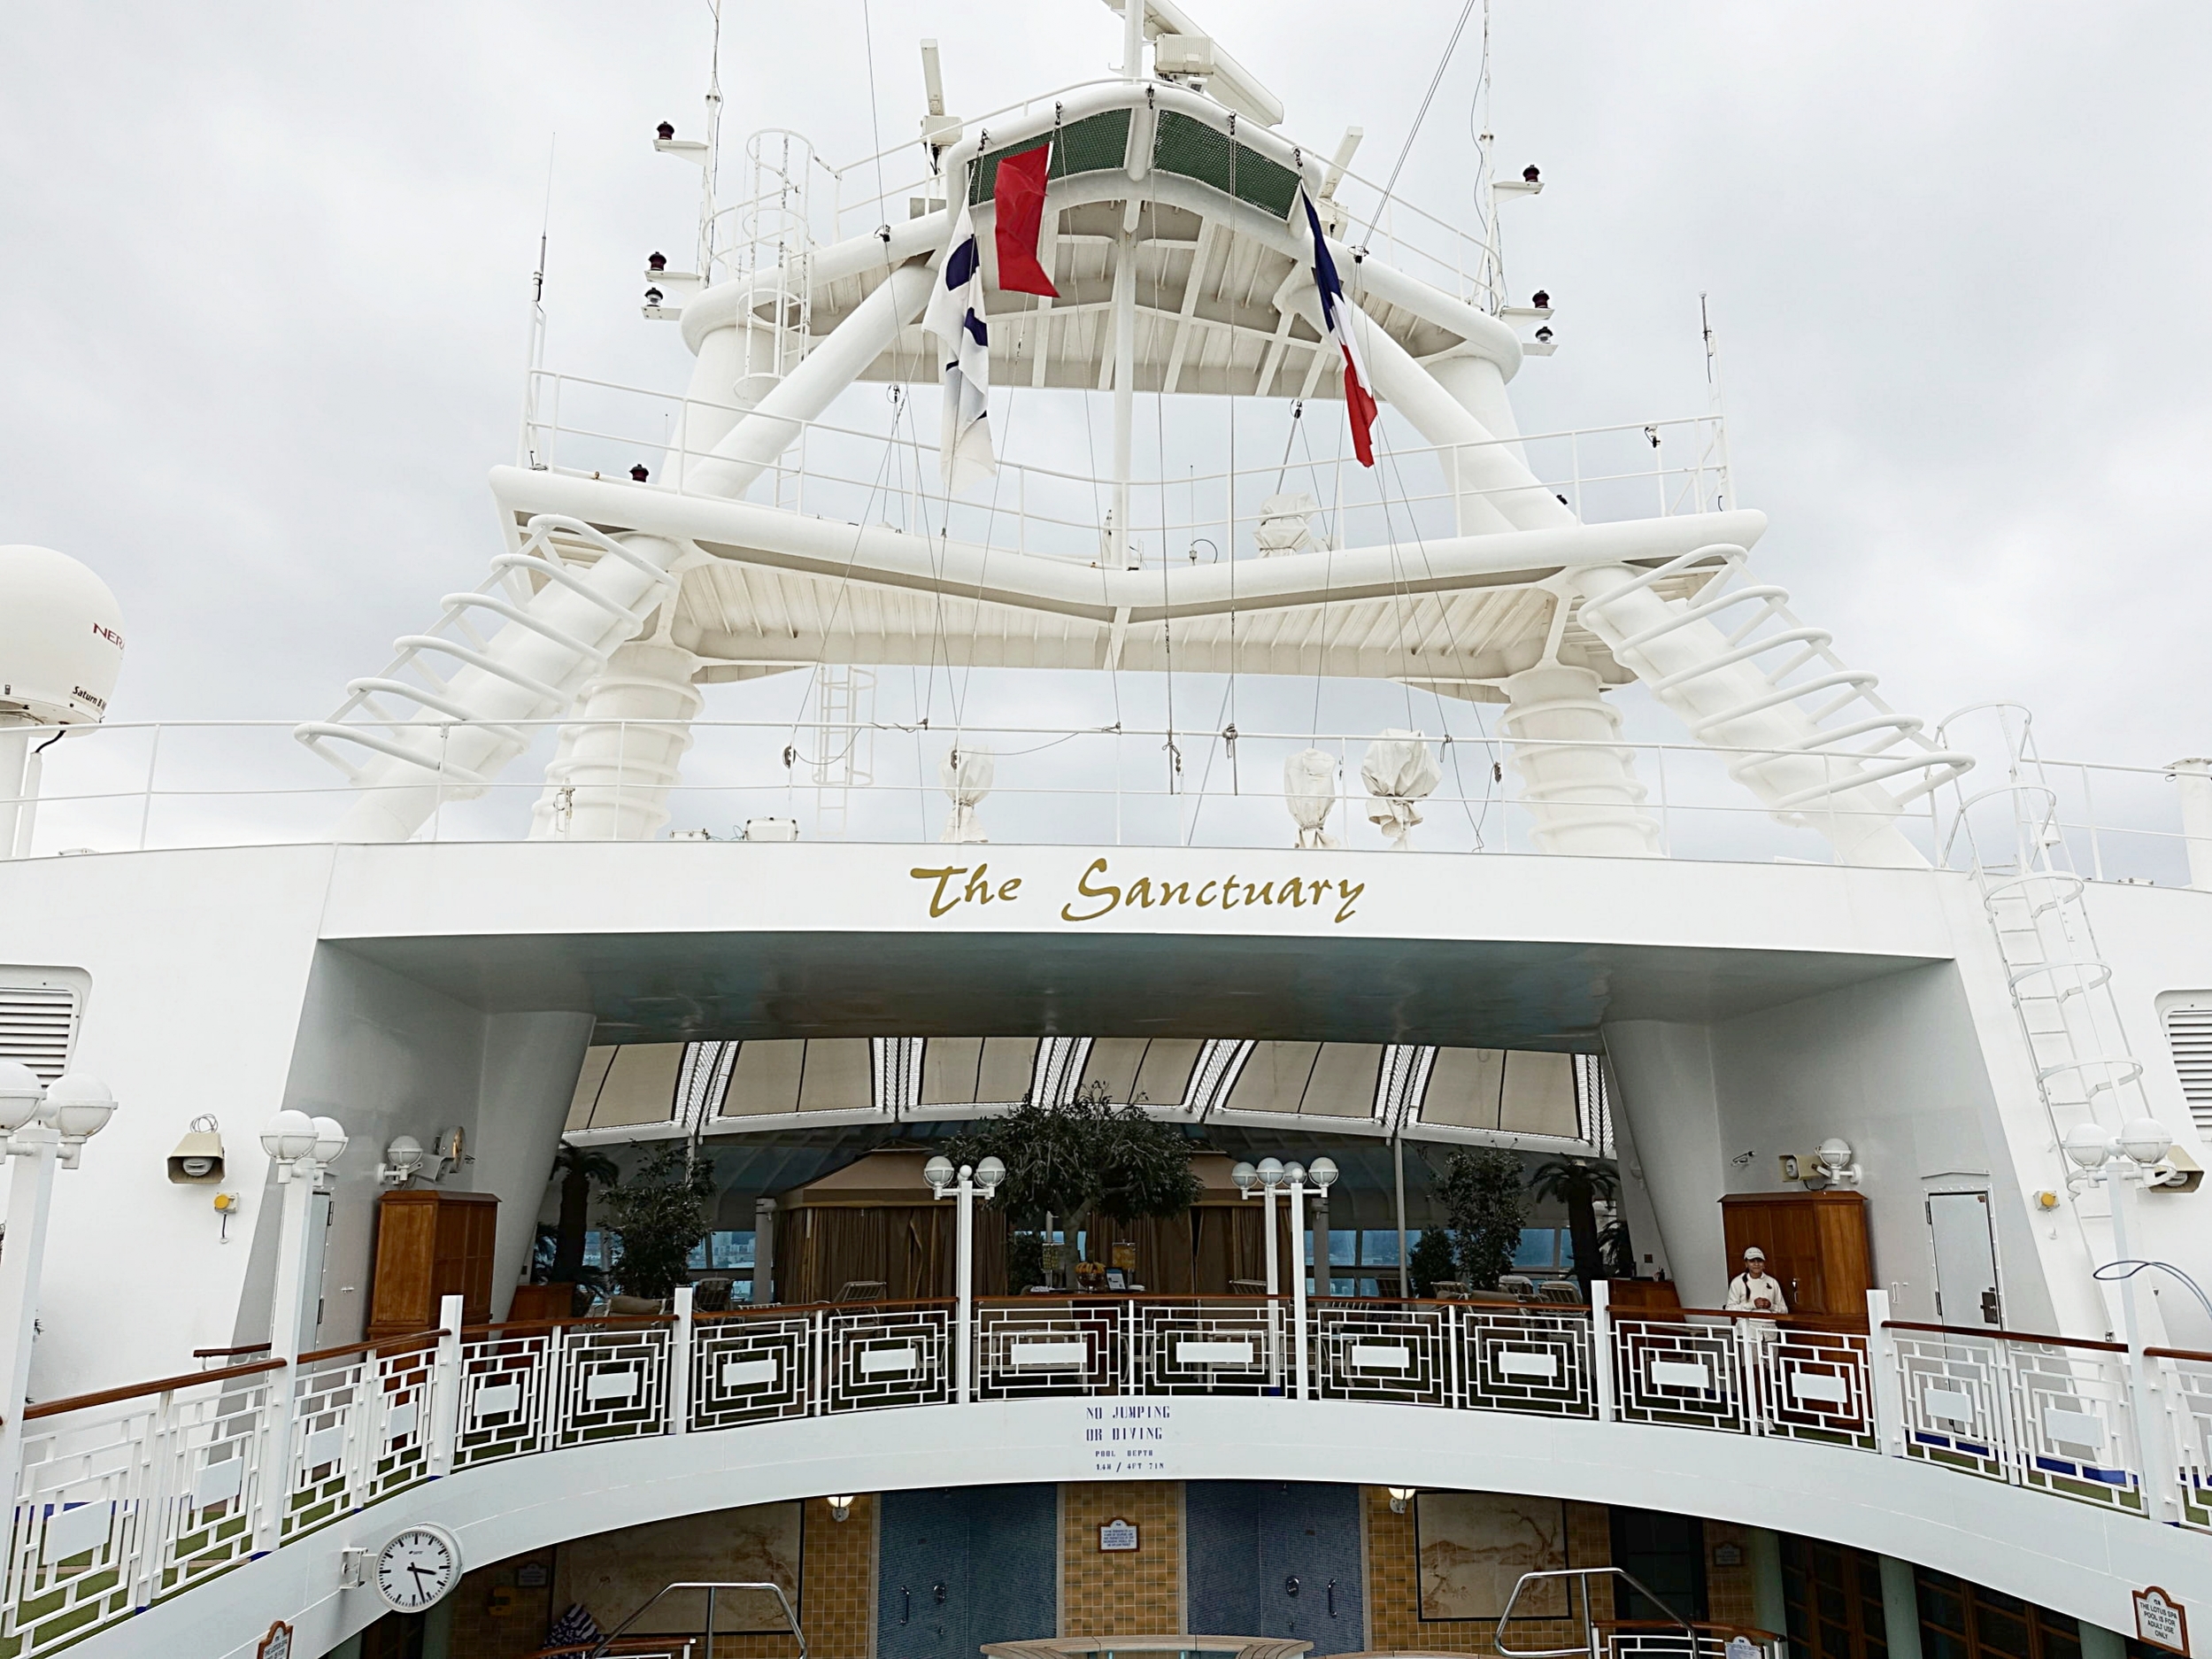  The Sanctuary area is situated right at the front on the top of the ship.  